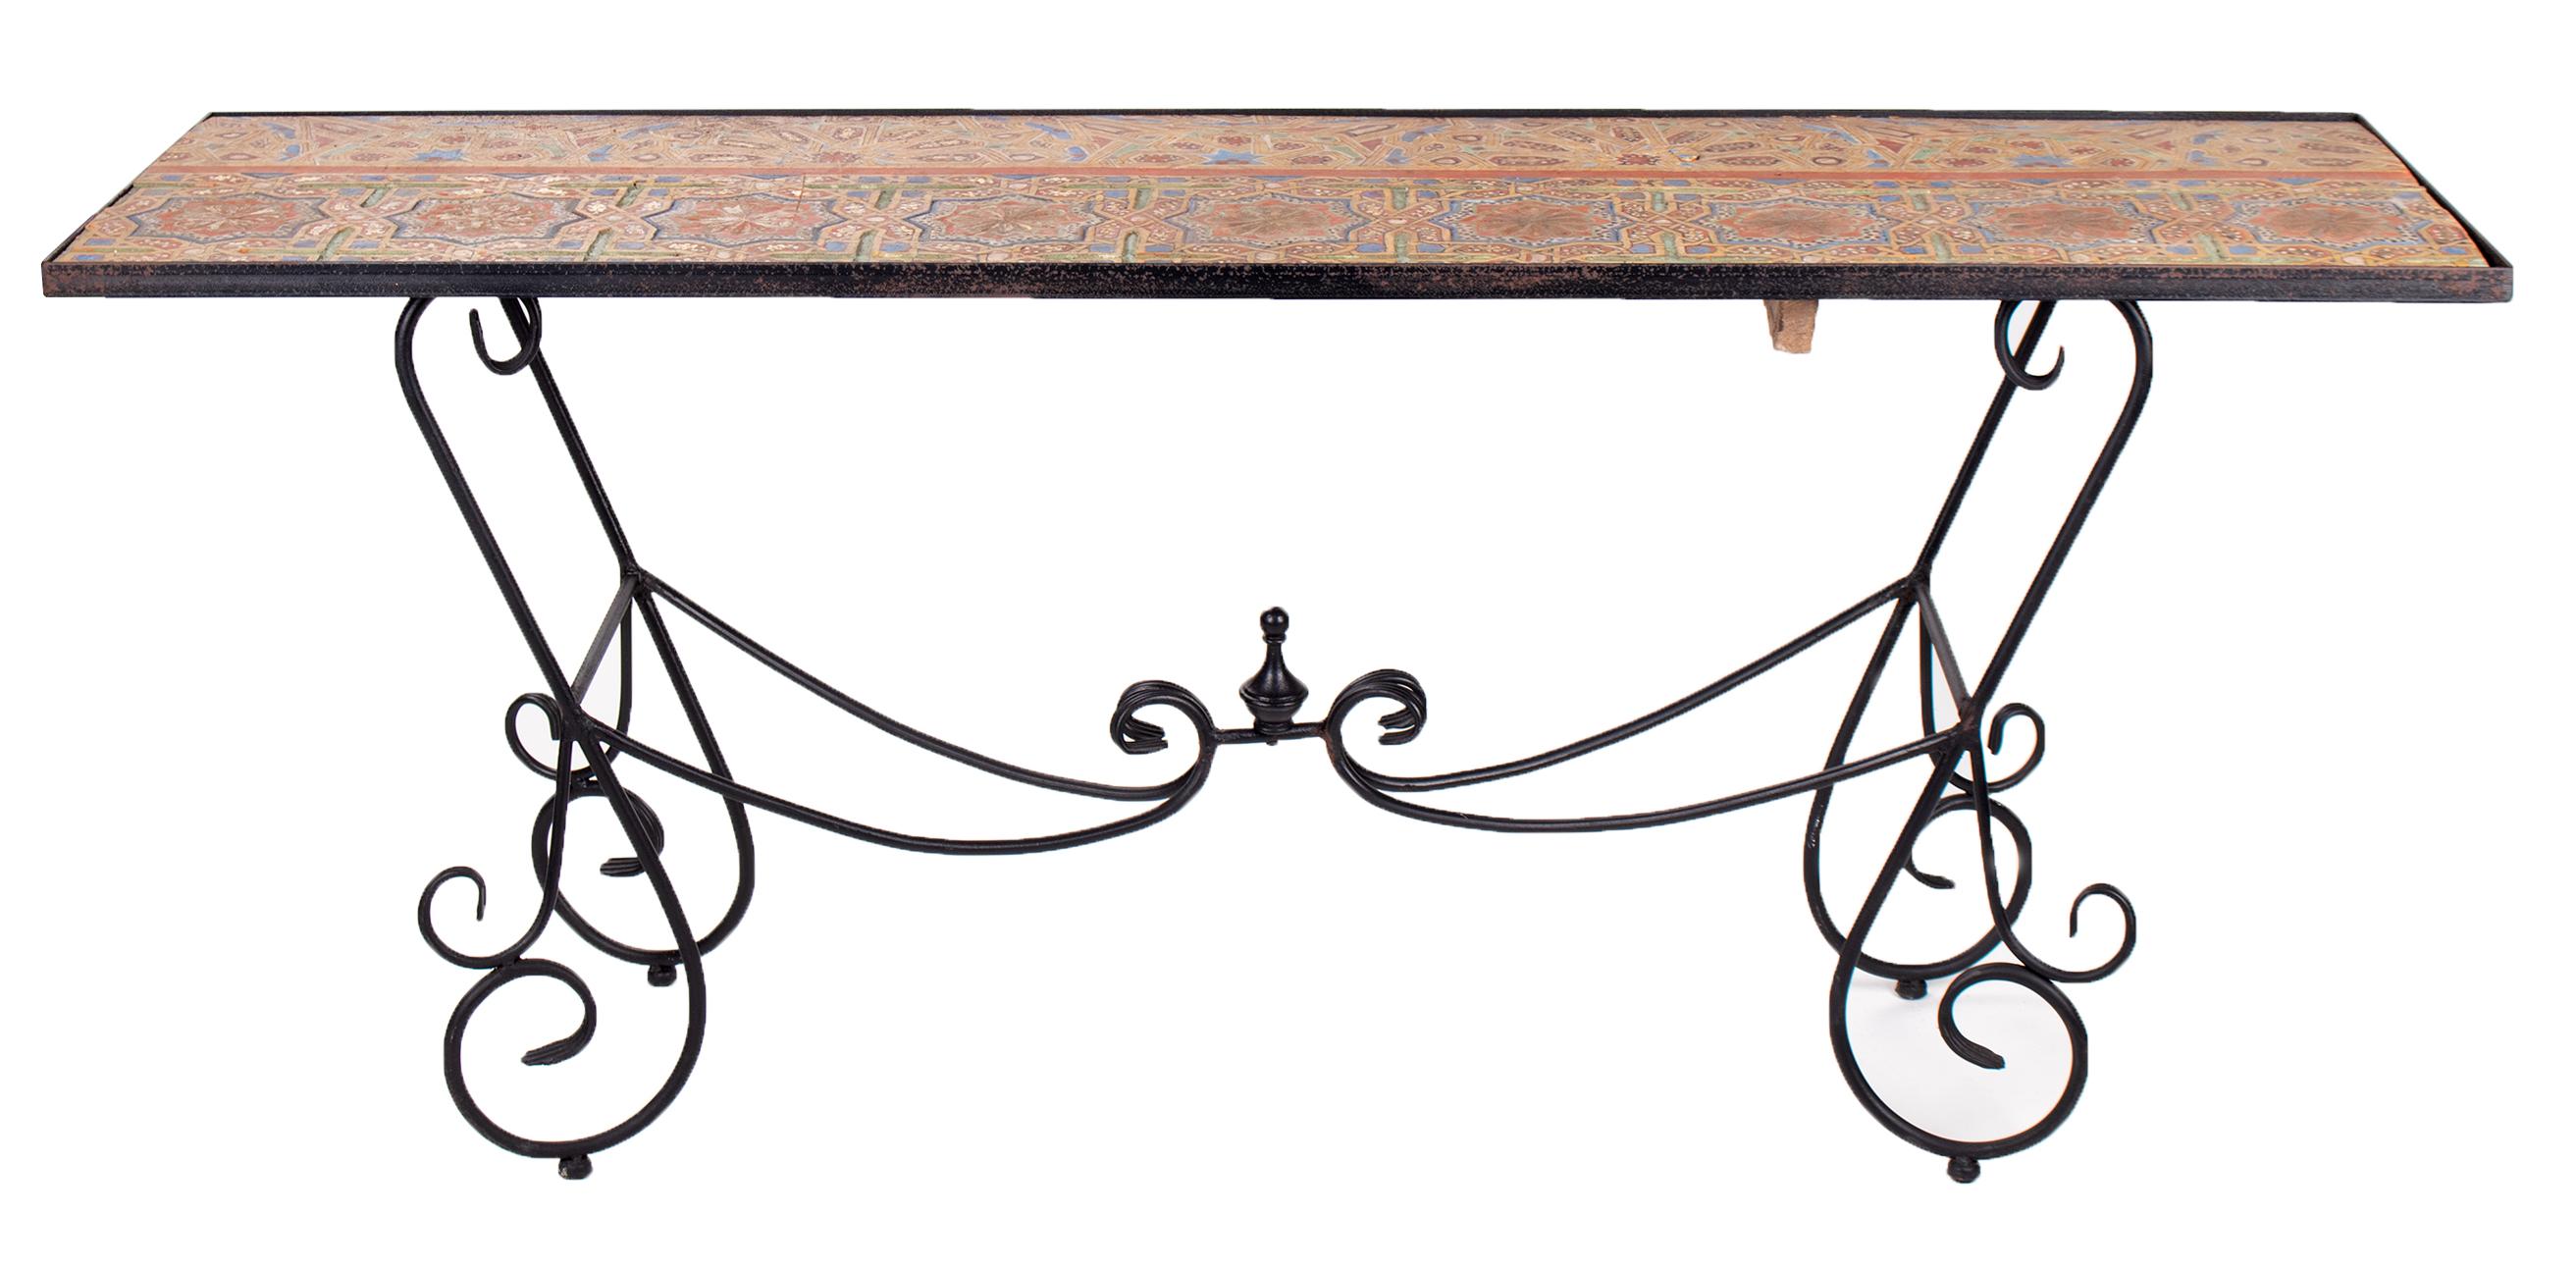 19th century wooden Orientalist painted relief console table with modern iron base.